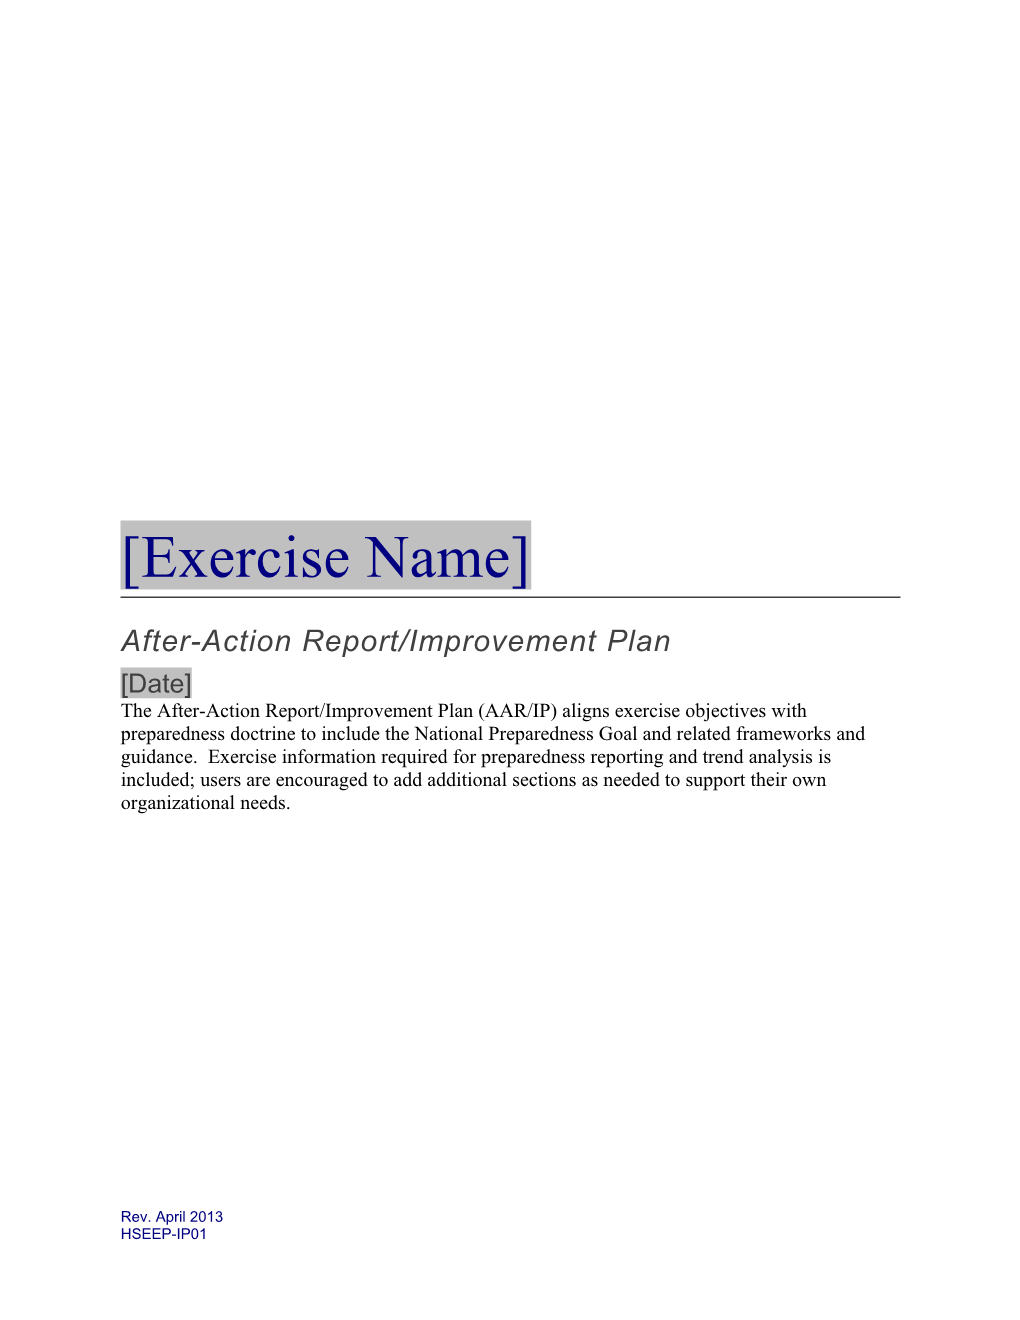 After-Action Report/Improvement Plan Template s1